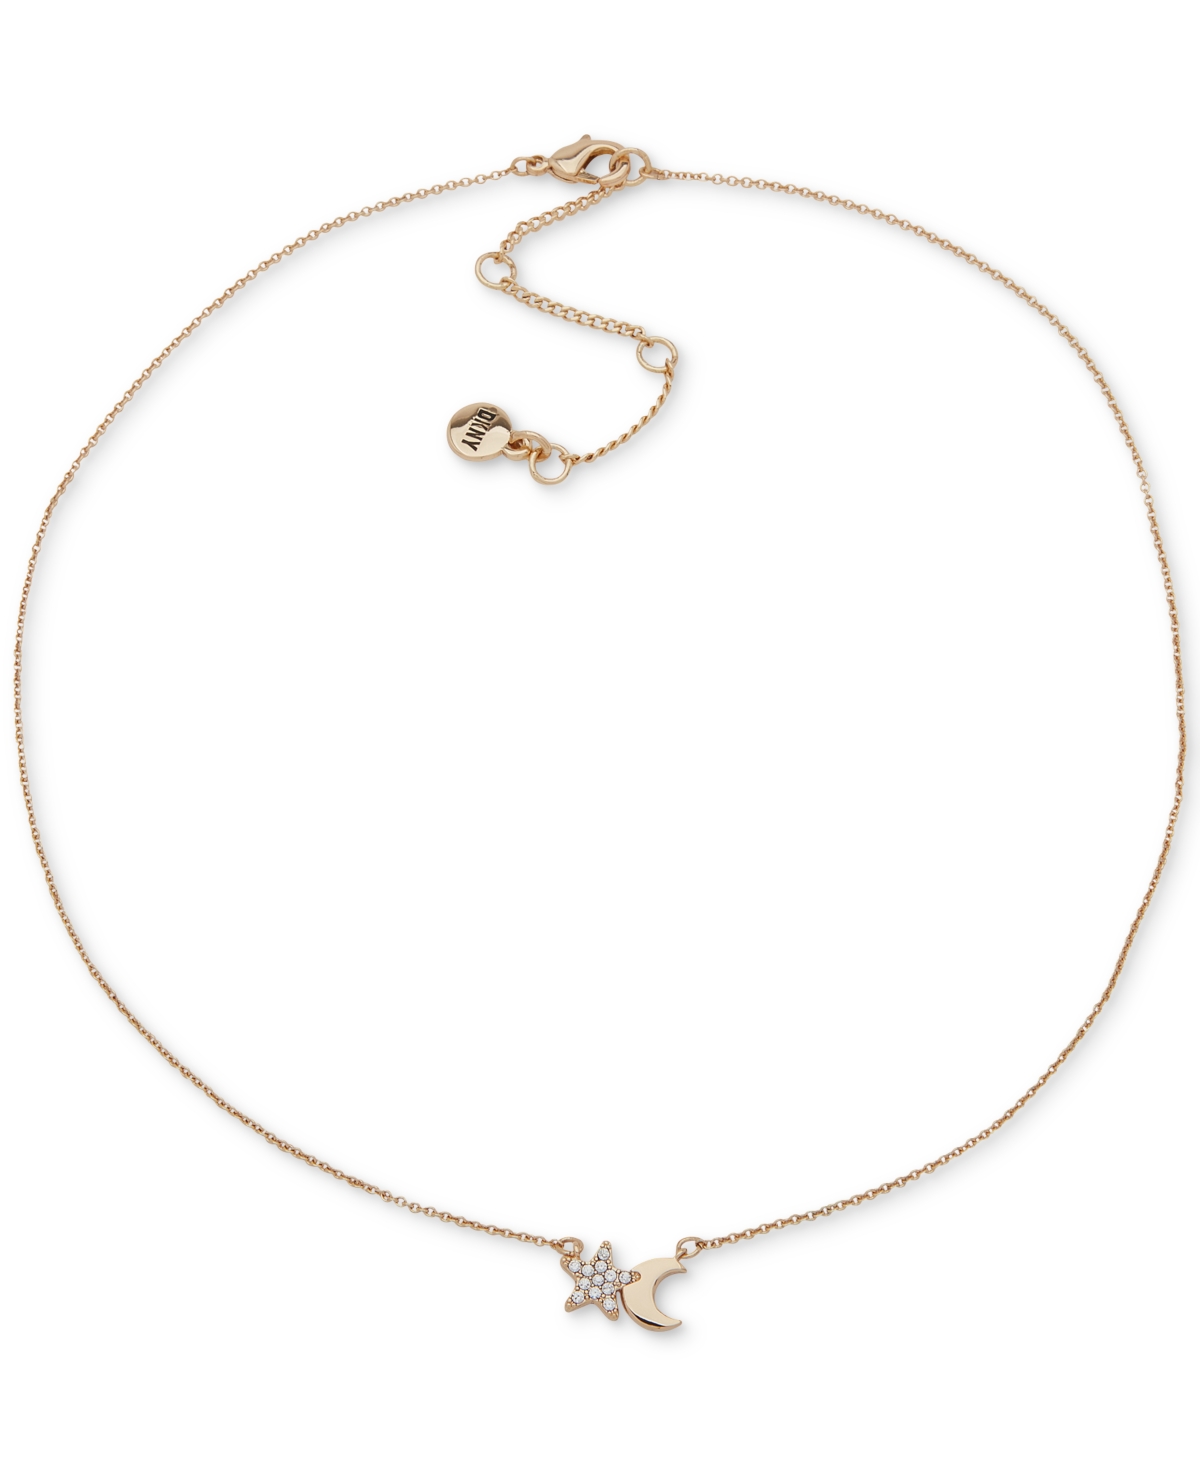 Gold-Tone Crystal Pave Star Moon Pendant Necklace, 16" + 3" extender - White